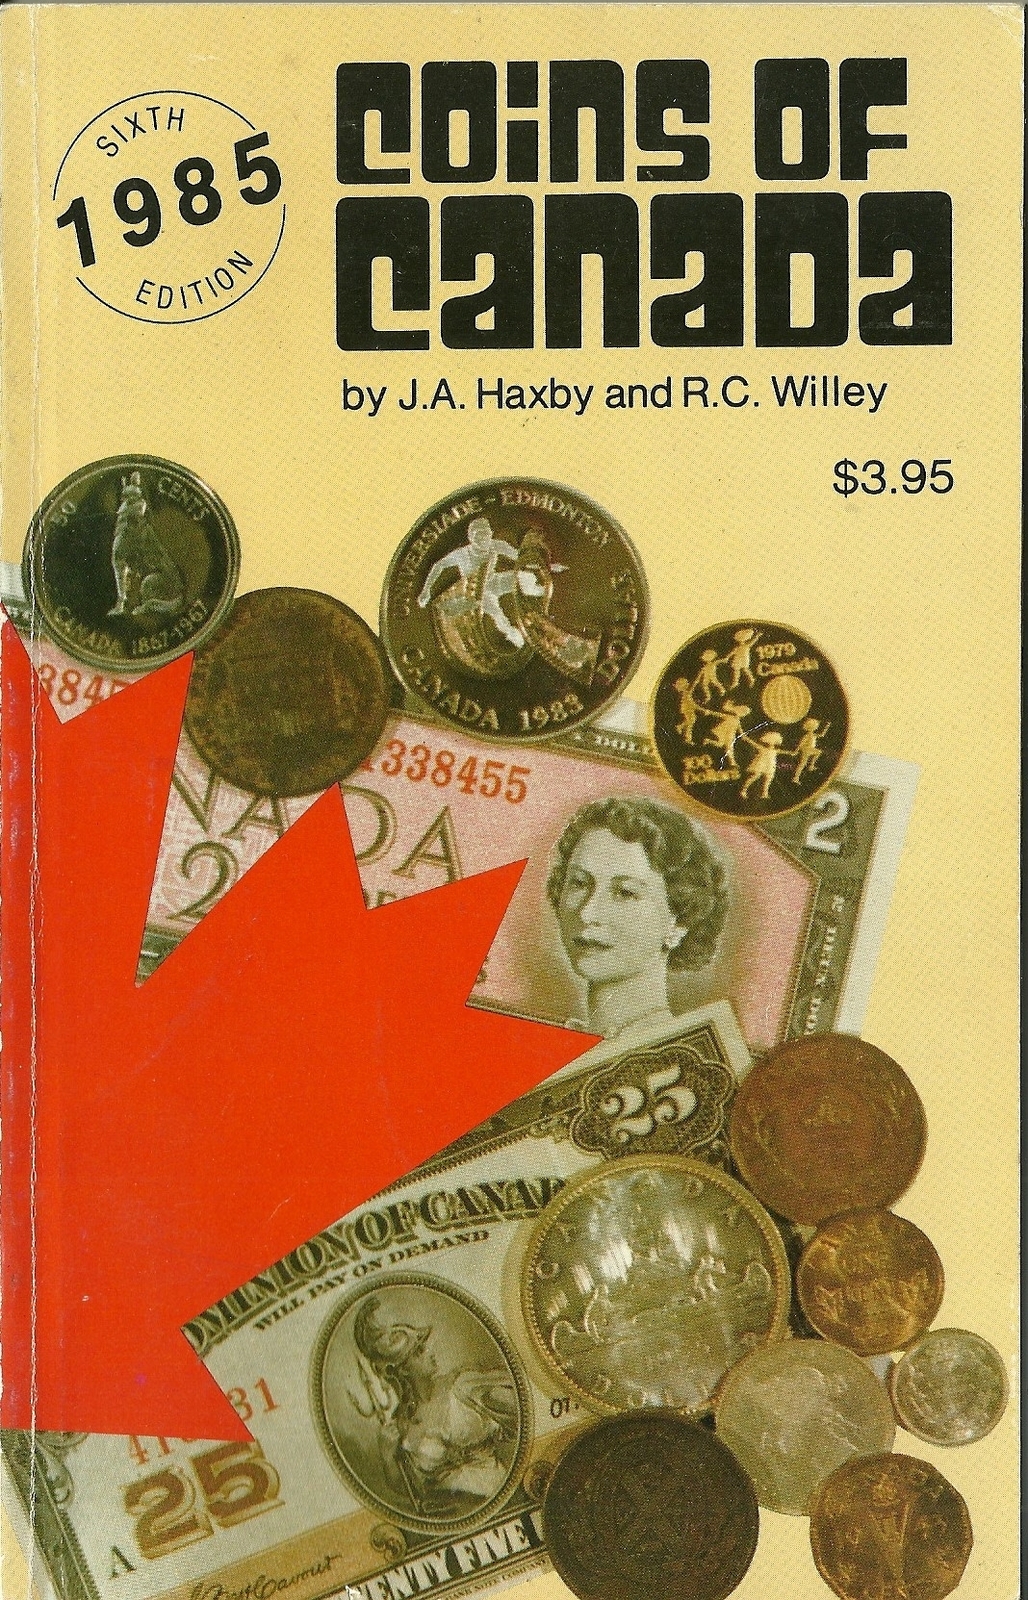 Primary image for Coins of Canada by J.A. Haxby and R.C. Willey Softcover Book 1985